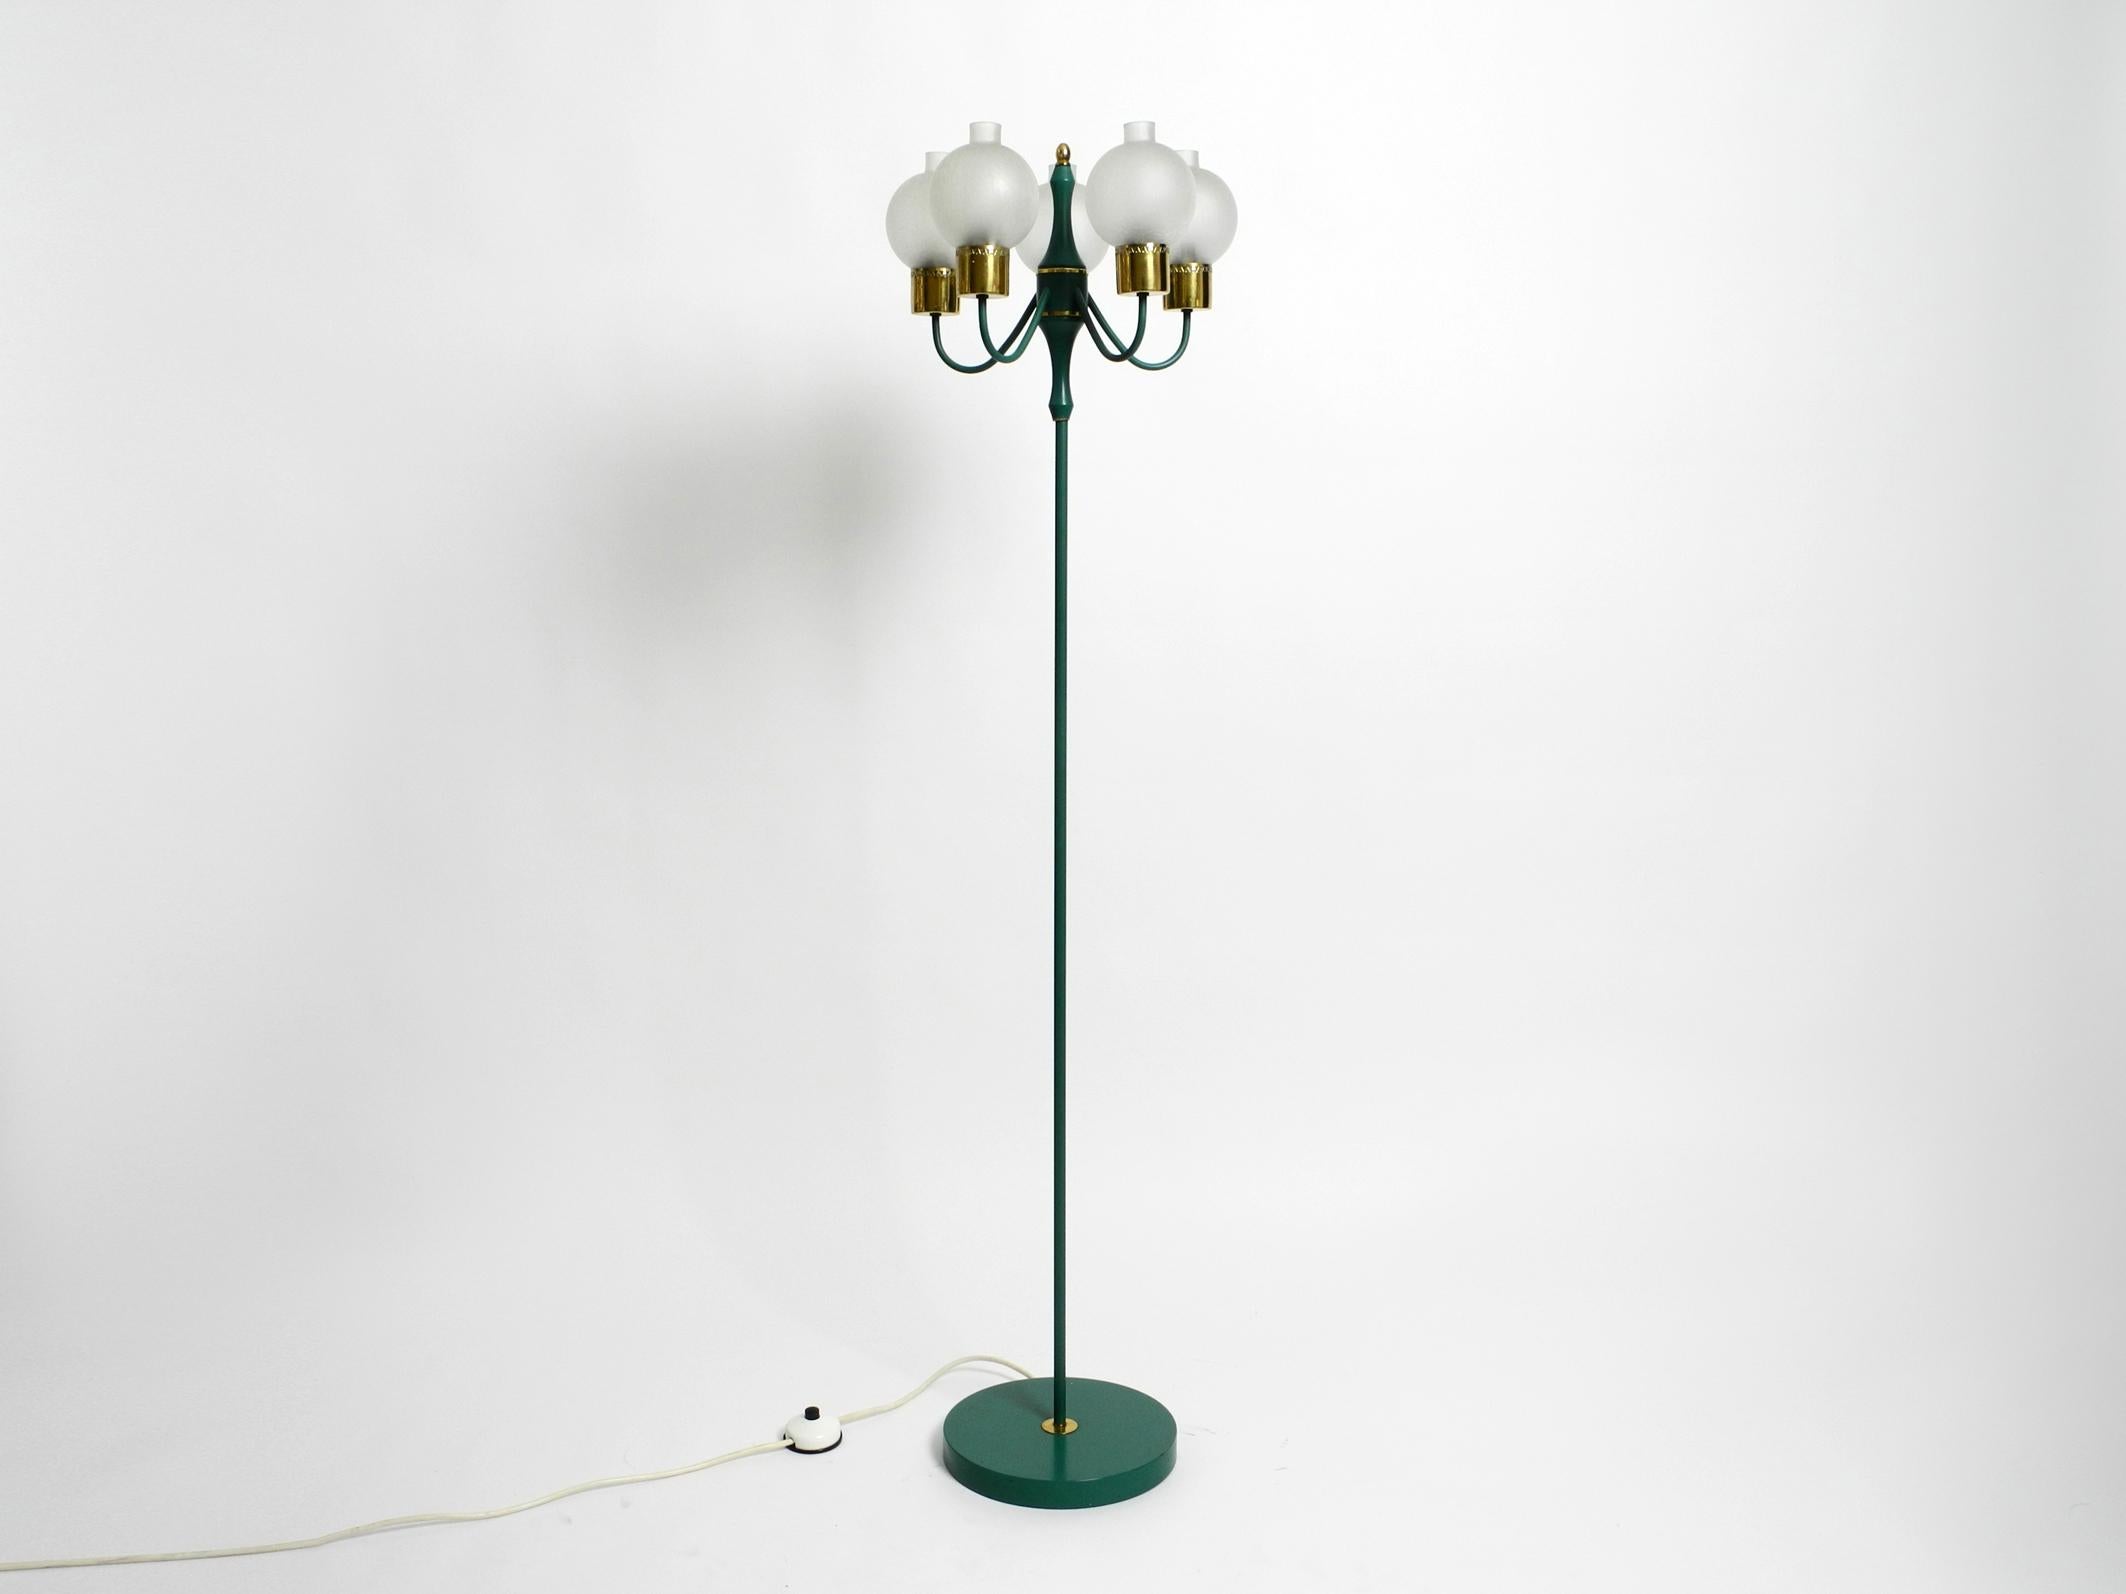 Beautiful rare Kaiser metal floor lamp with 5 ice glass shades. Super sixties design in rare forest green. Very good vintage condition with no damage. Few signs of use visible.
Very well-maintained condition. No rust on the whole frame.
100%